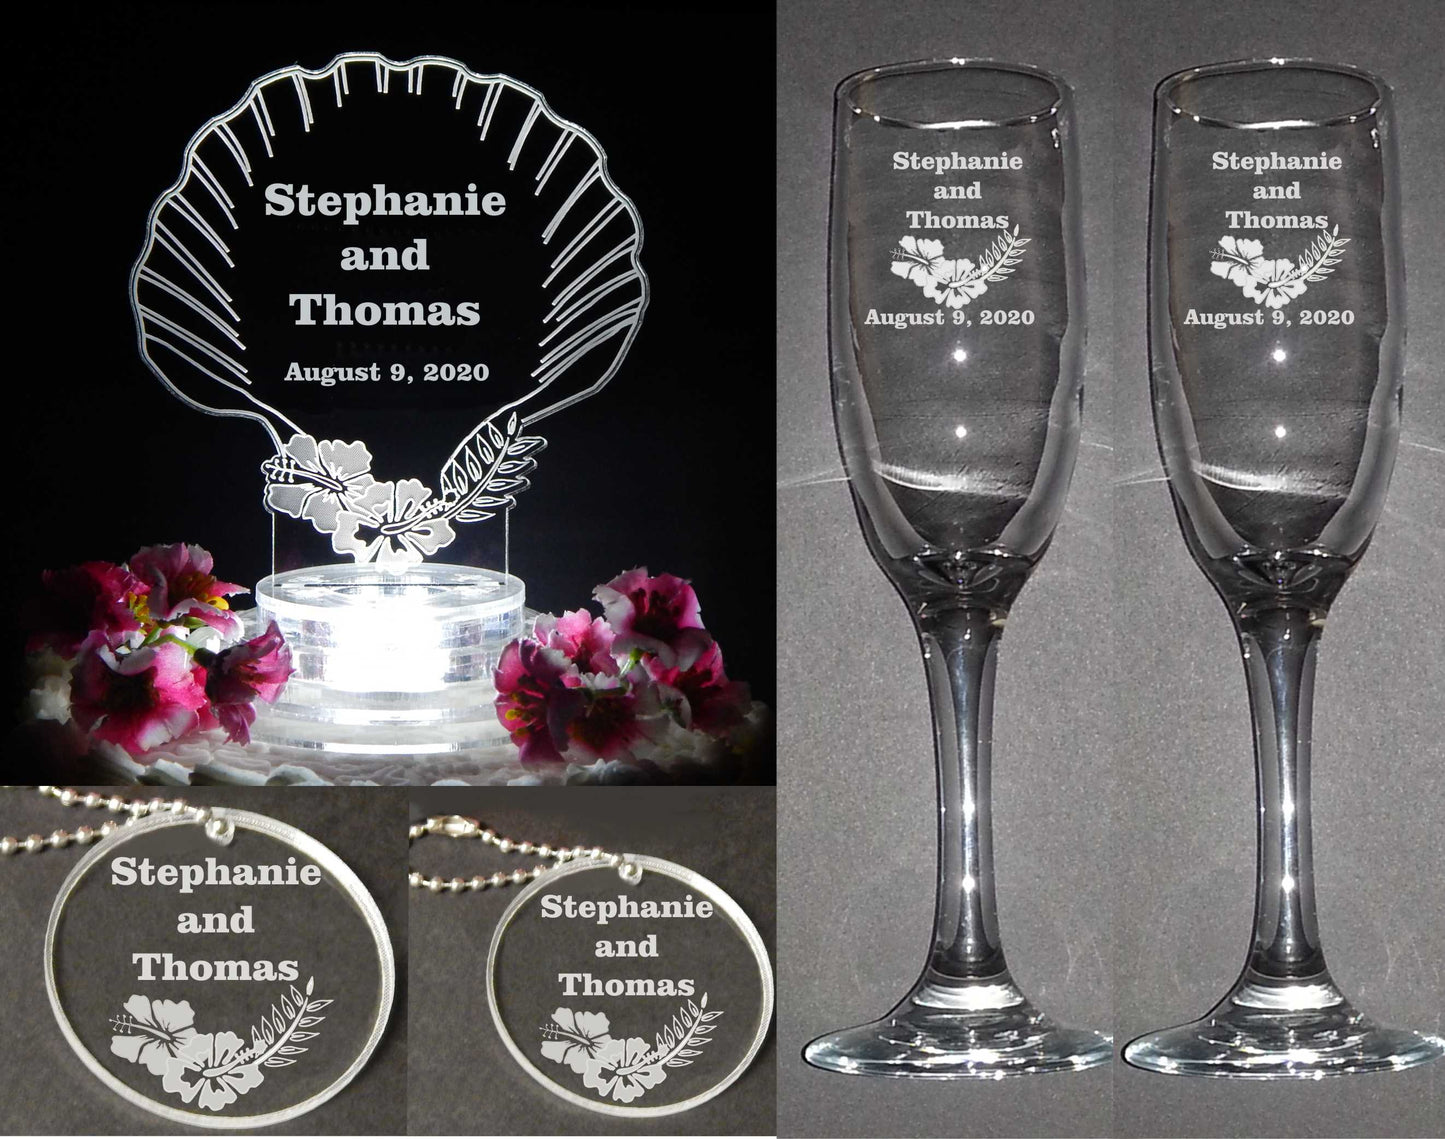 Assorted photos showing wedding package that includes Seashell Shaped Cake Topper, large and small matching keychains, and set of two engraved champagne flutes